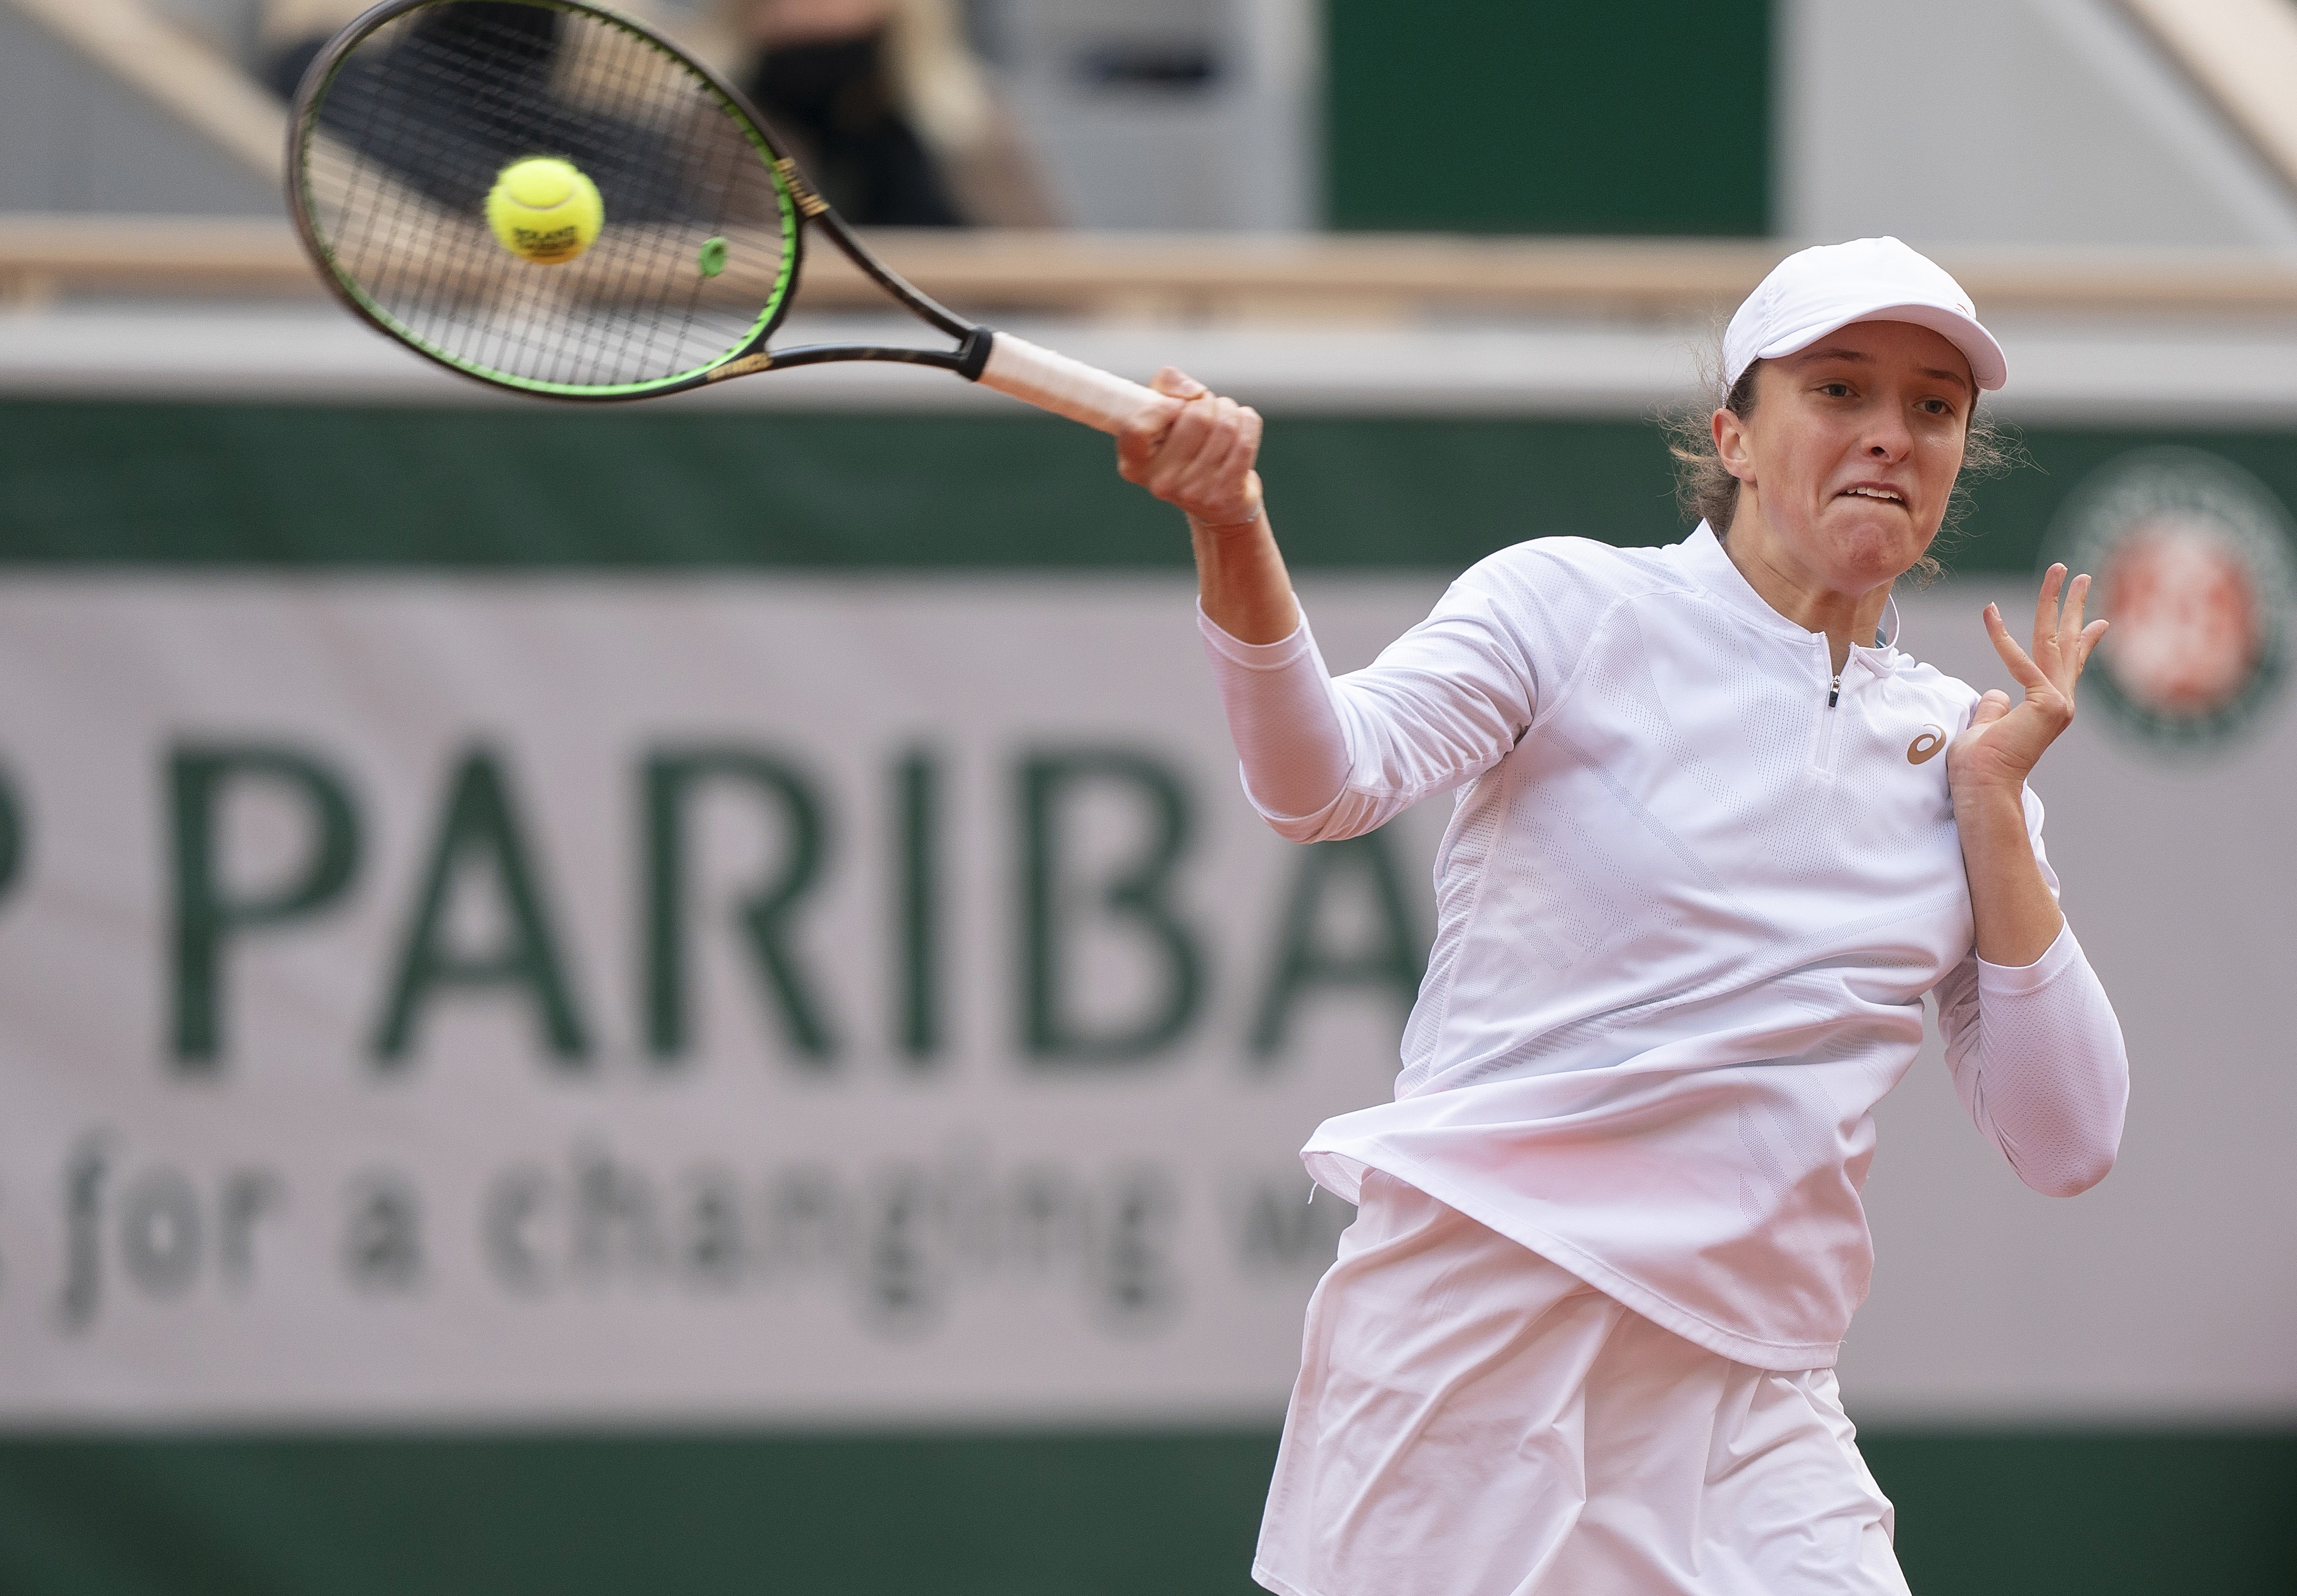 French Open champion Iga Swiatek and US Open winner Naomi Osaka among nominees for WTAs Player of the Year award NewsChain